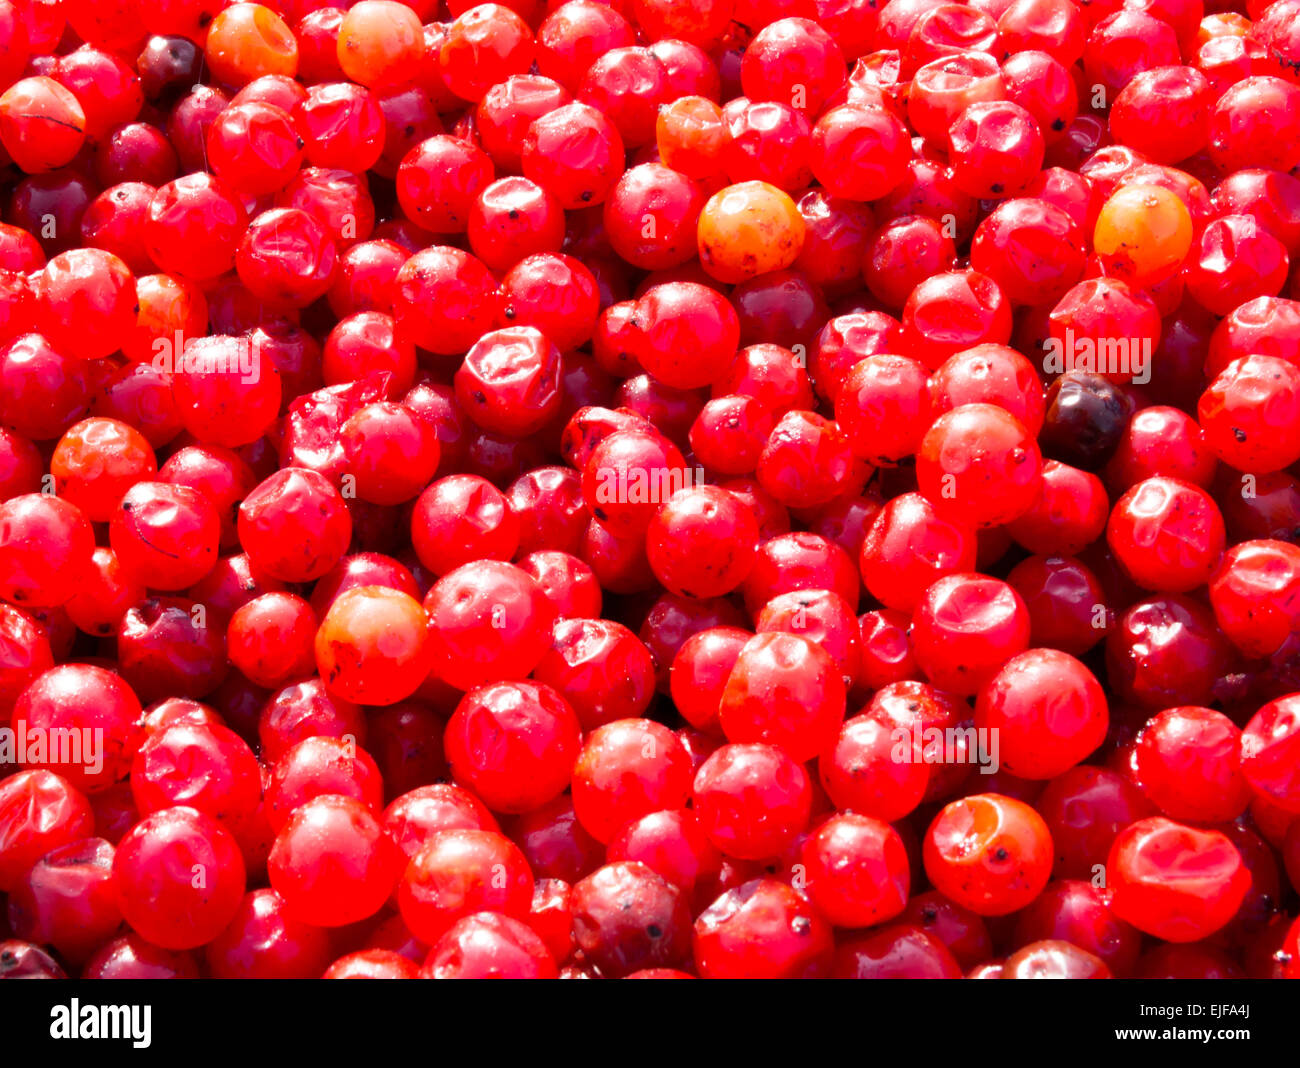 Red currants for sale and used as a cooking ingredient in drinks and tea Stock Photo